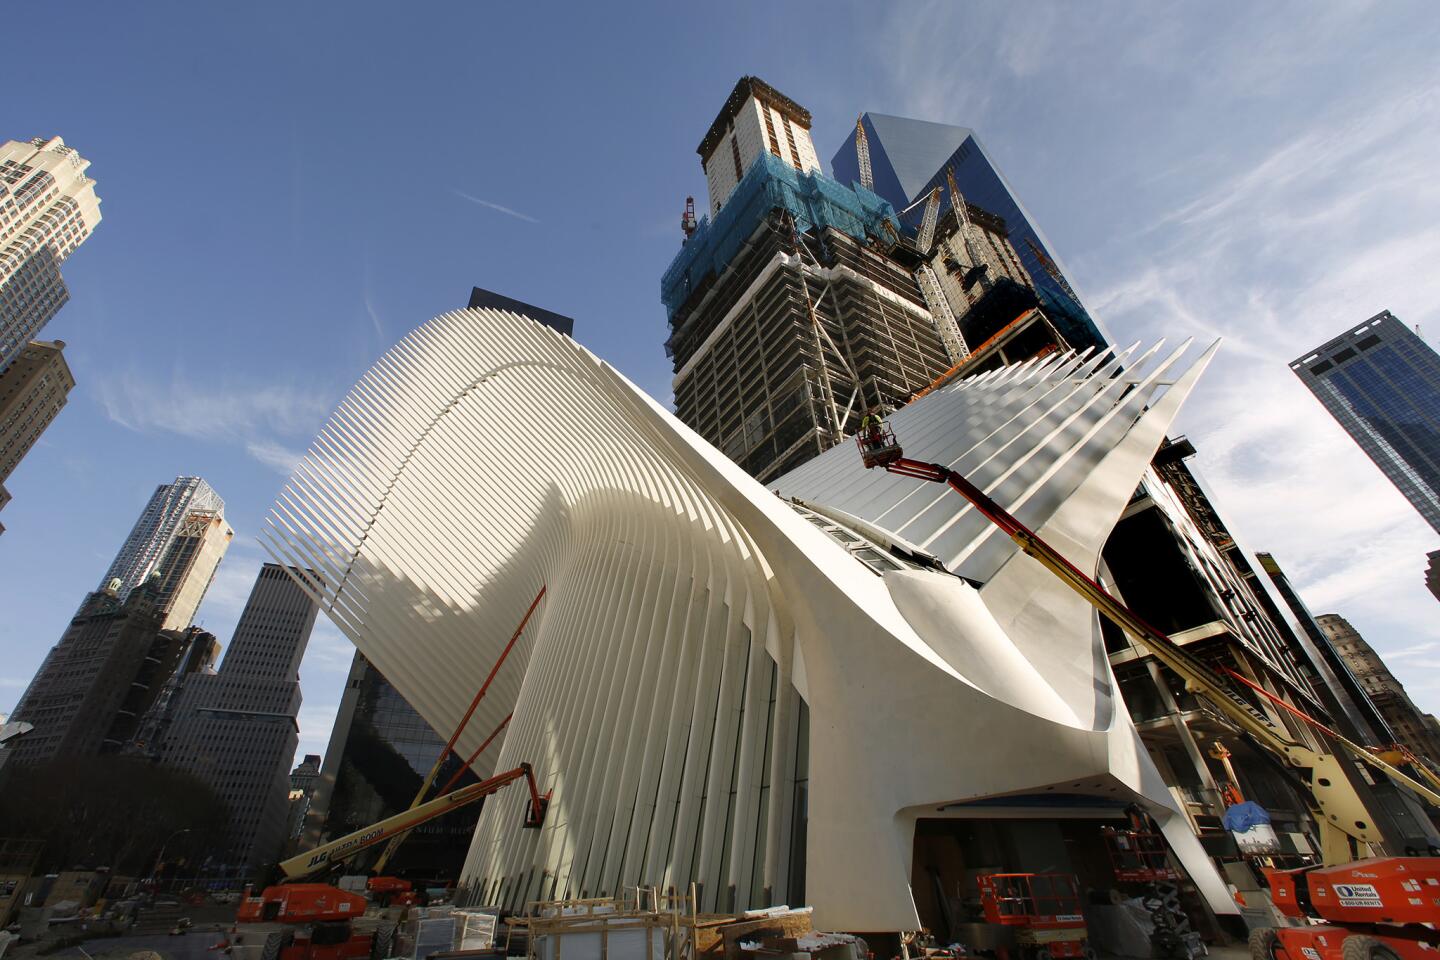 Workers put some finishing touches on the new transportation hub at the World Trade Center. The first phase of the hub, called Oculus and designed by Spanish architect Santiago Calatrava, will open on March 3, 2016.